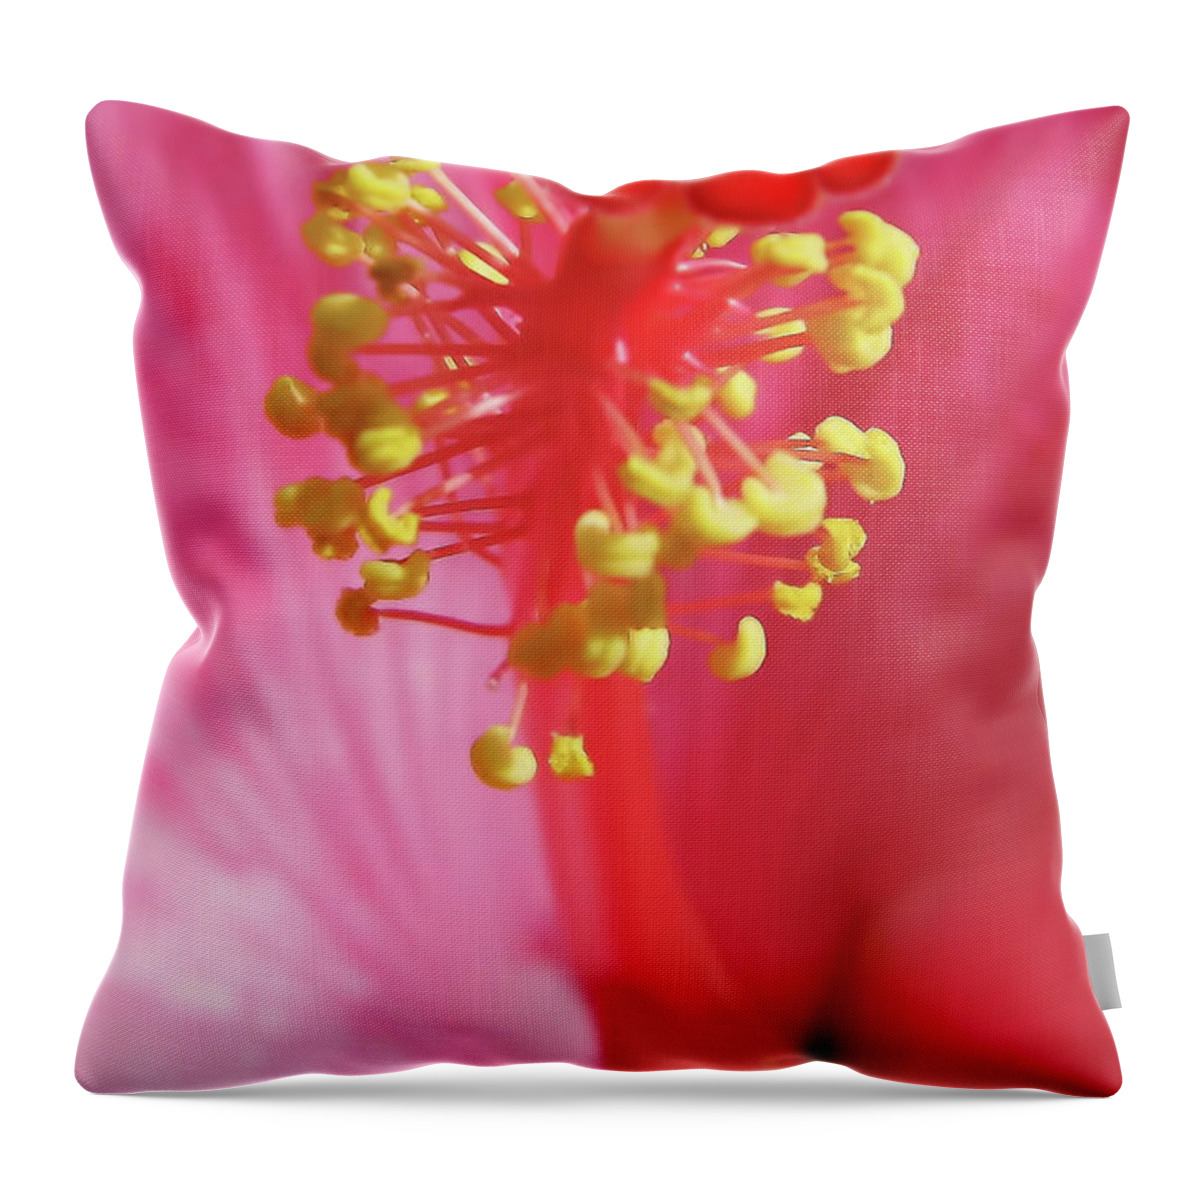 Hibiscus Throw Pillow featuring the photograph Inside The Hibiscus by D Hackett